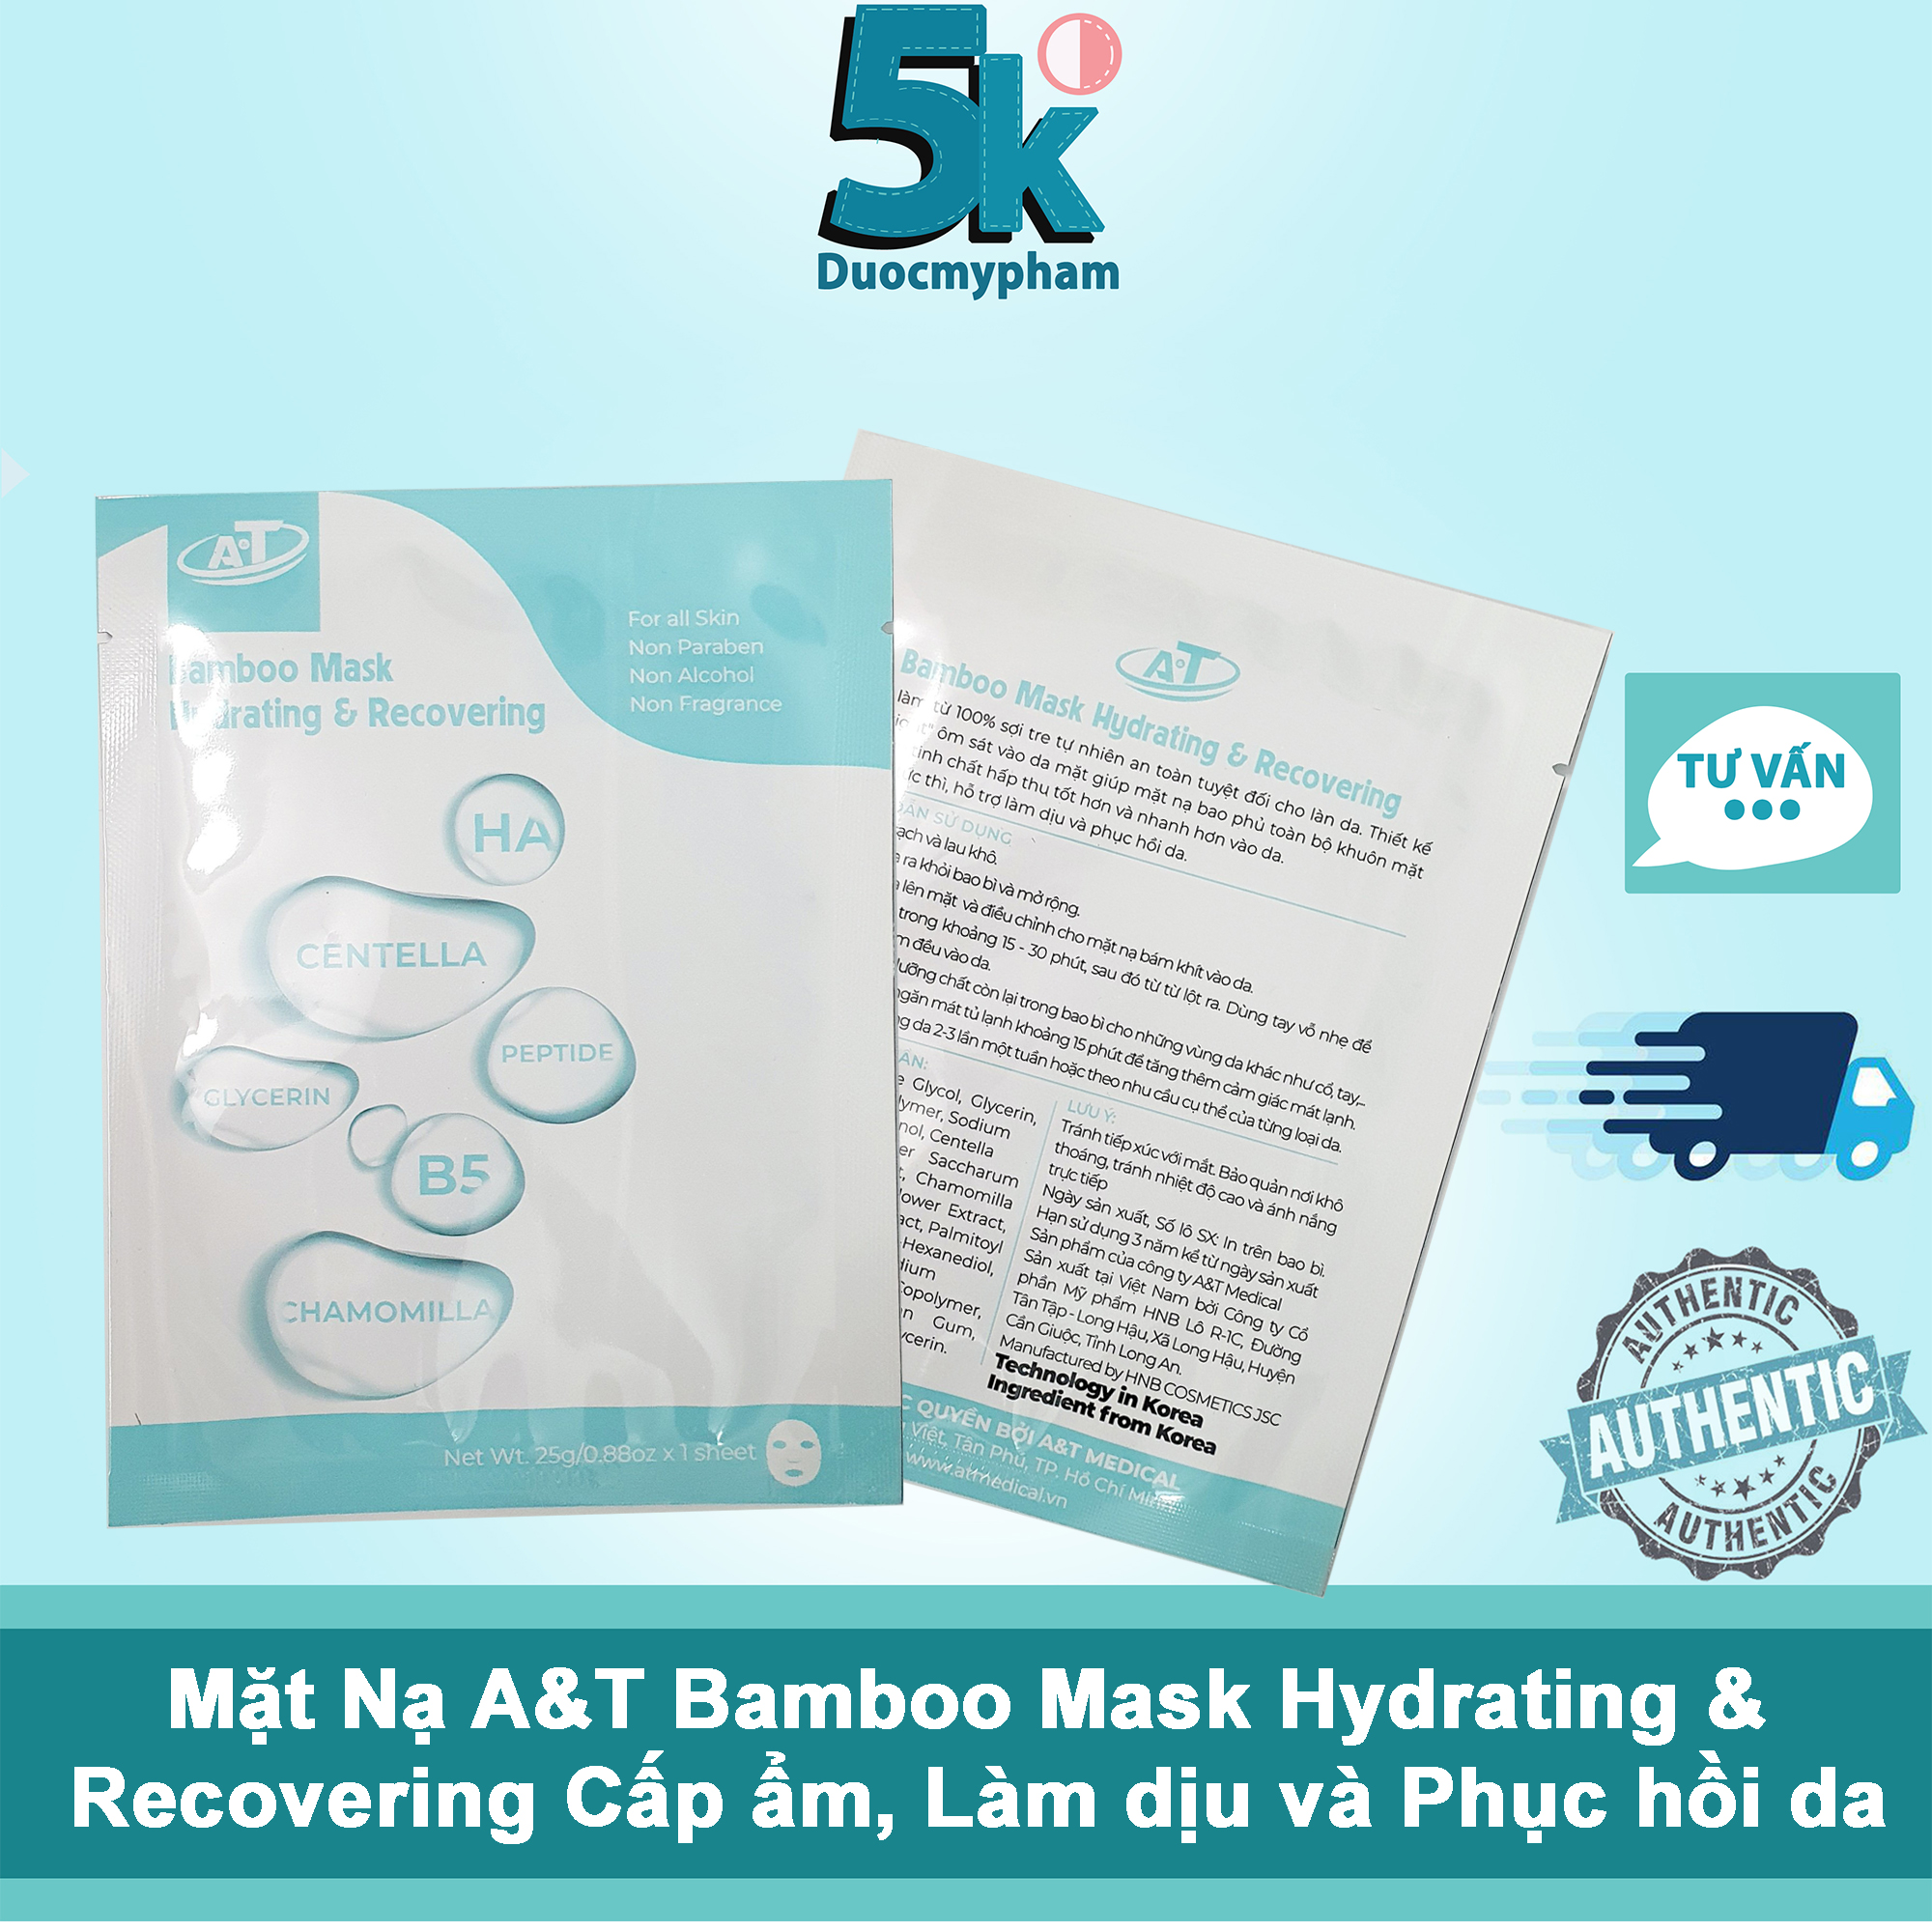 Mặt Nạ B5 A&T Bamboo Mask Hydrating & Recovering Cấp ẩm